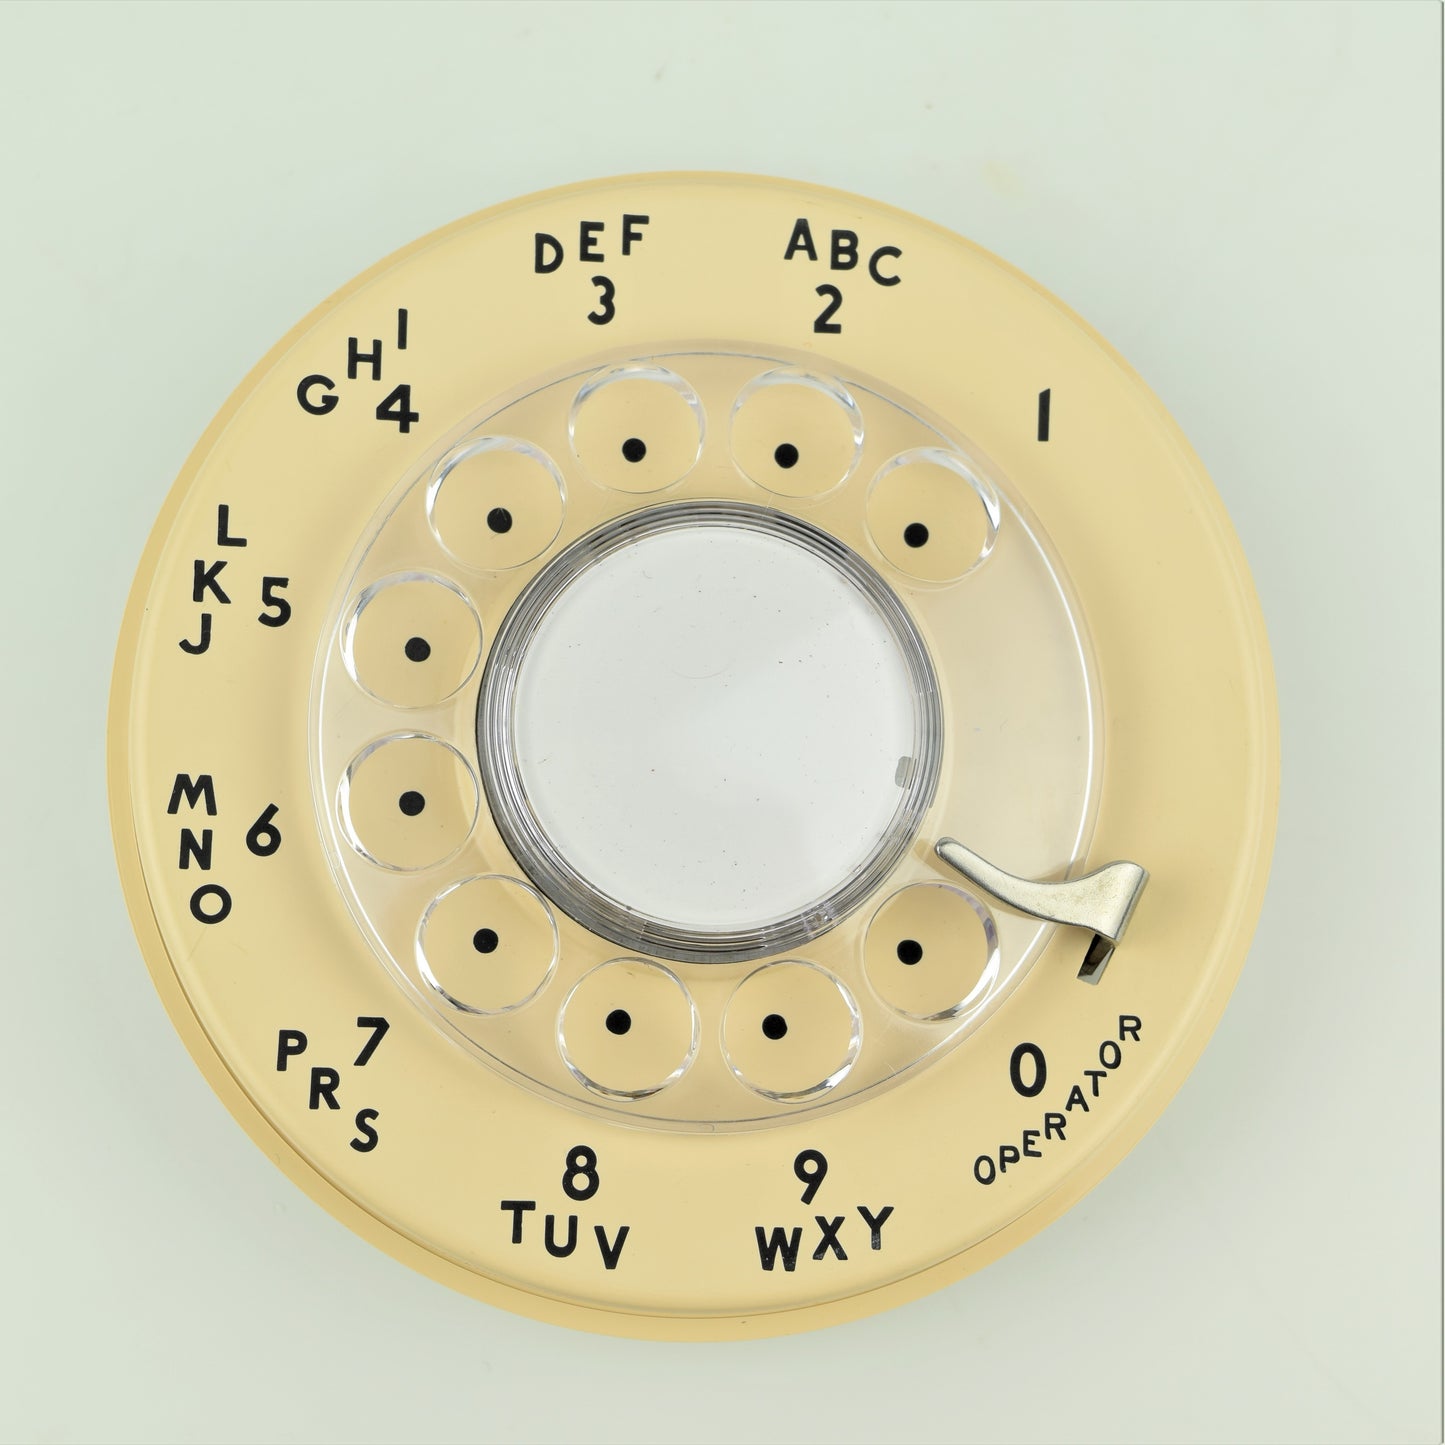 Western Electric - 500 Dial - Ivory